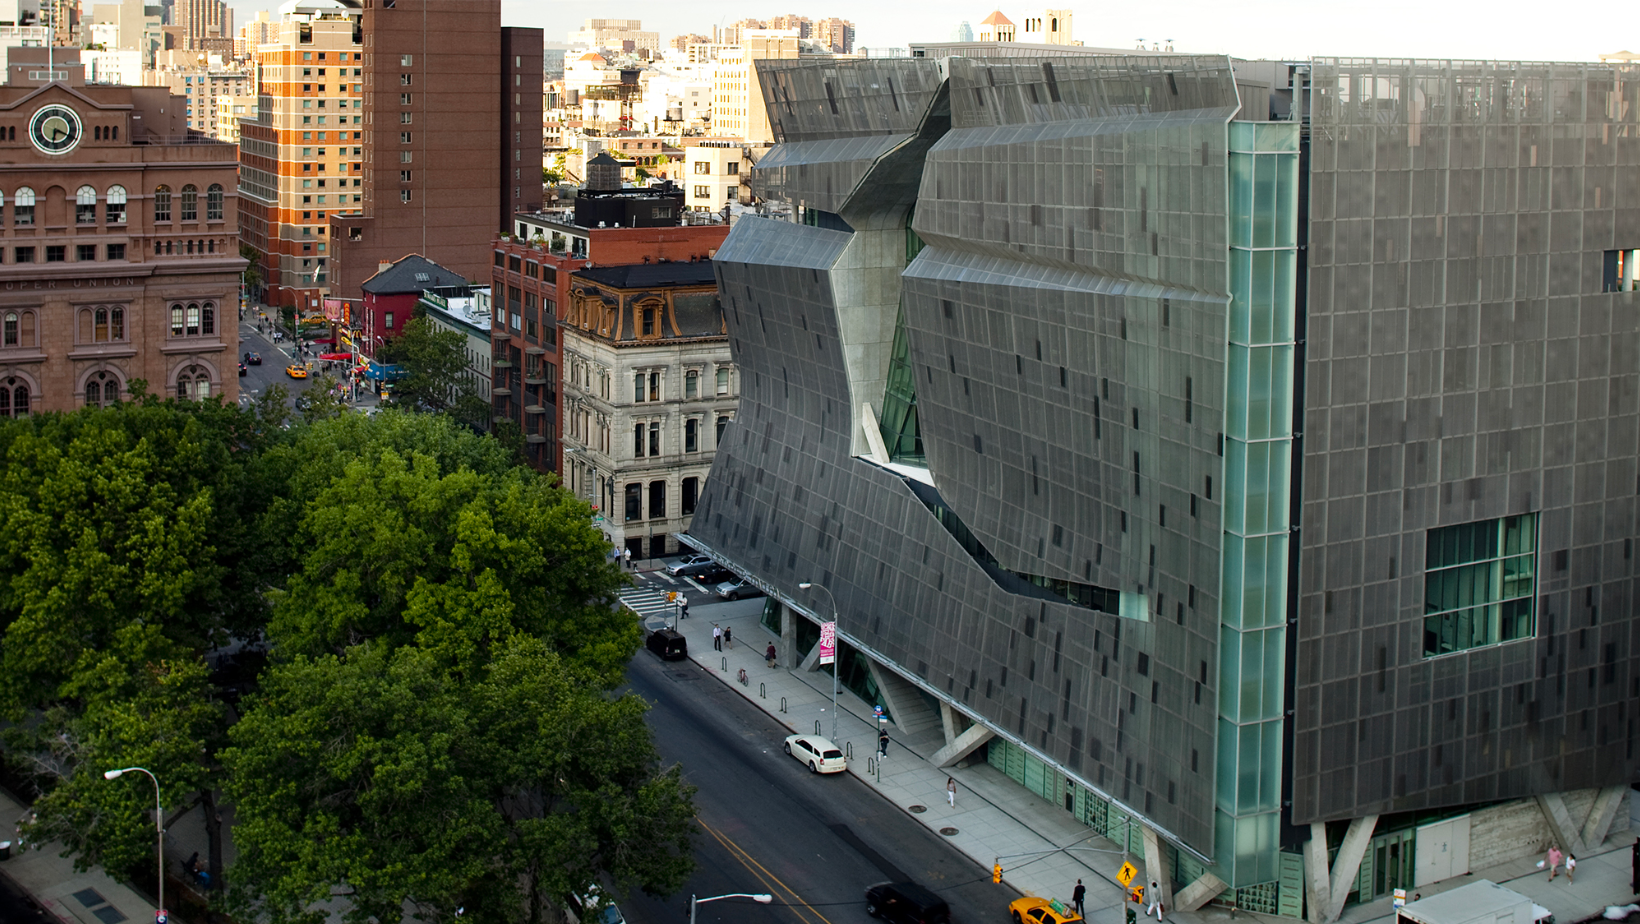 Interdisciplinary Innovation: A Look at The Cooper Union in NYC